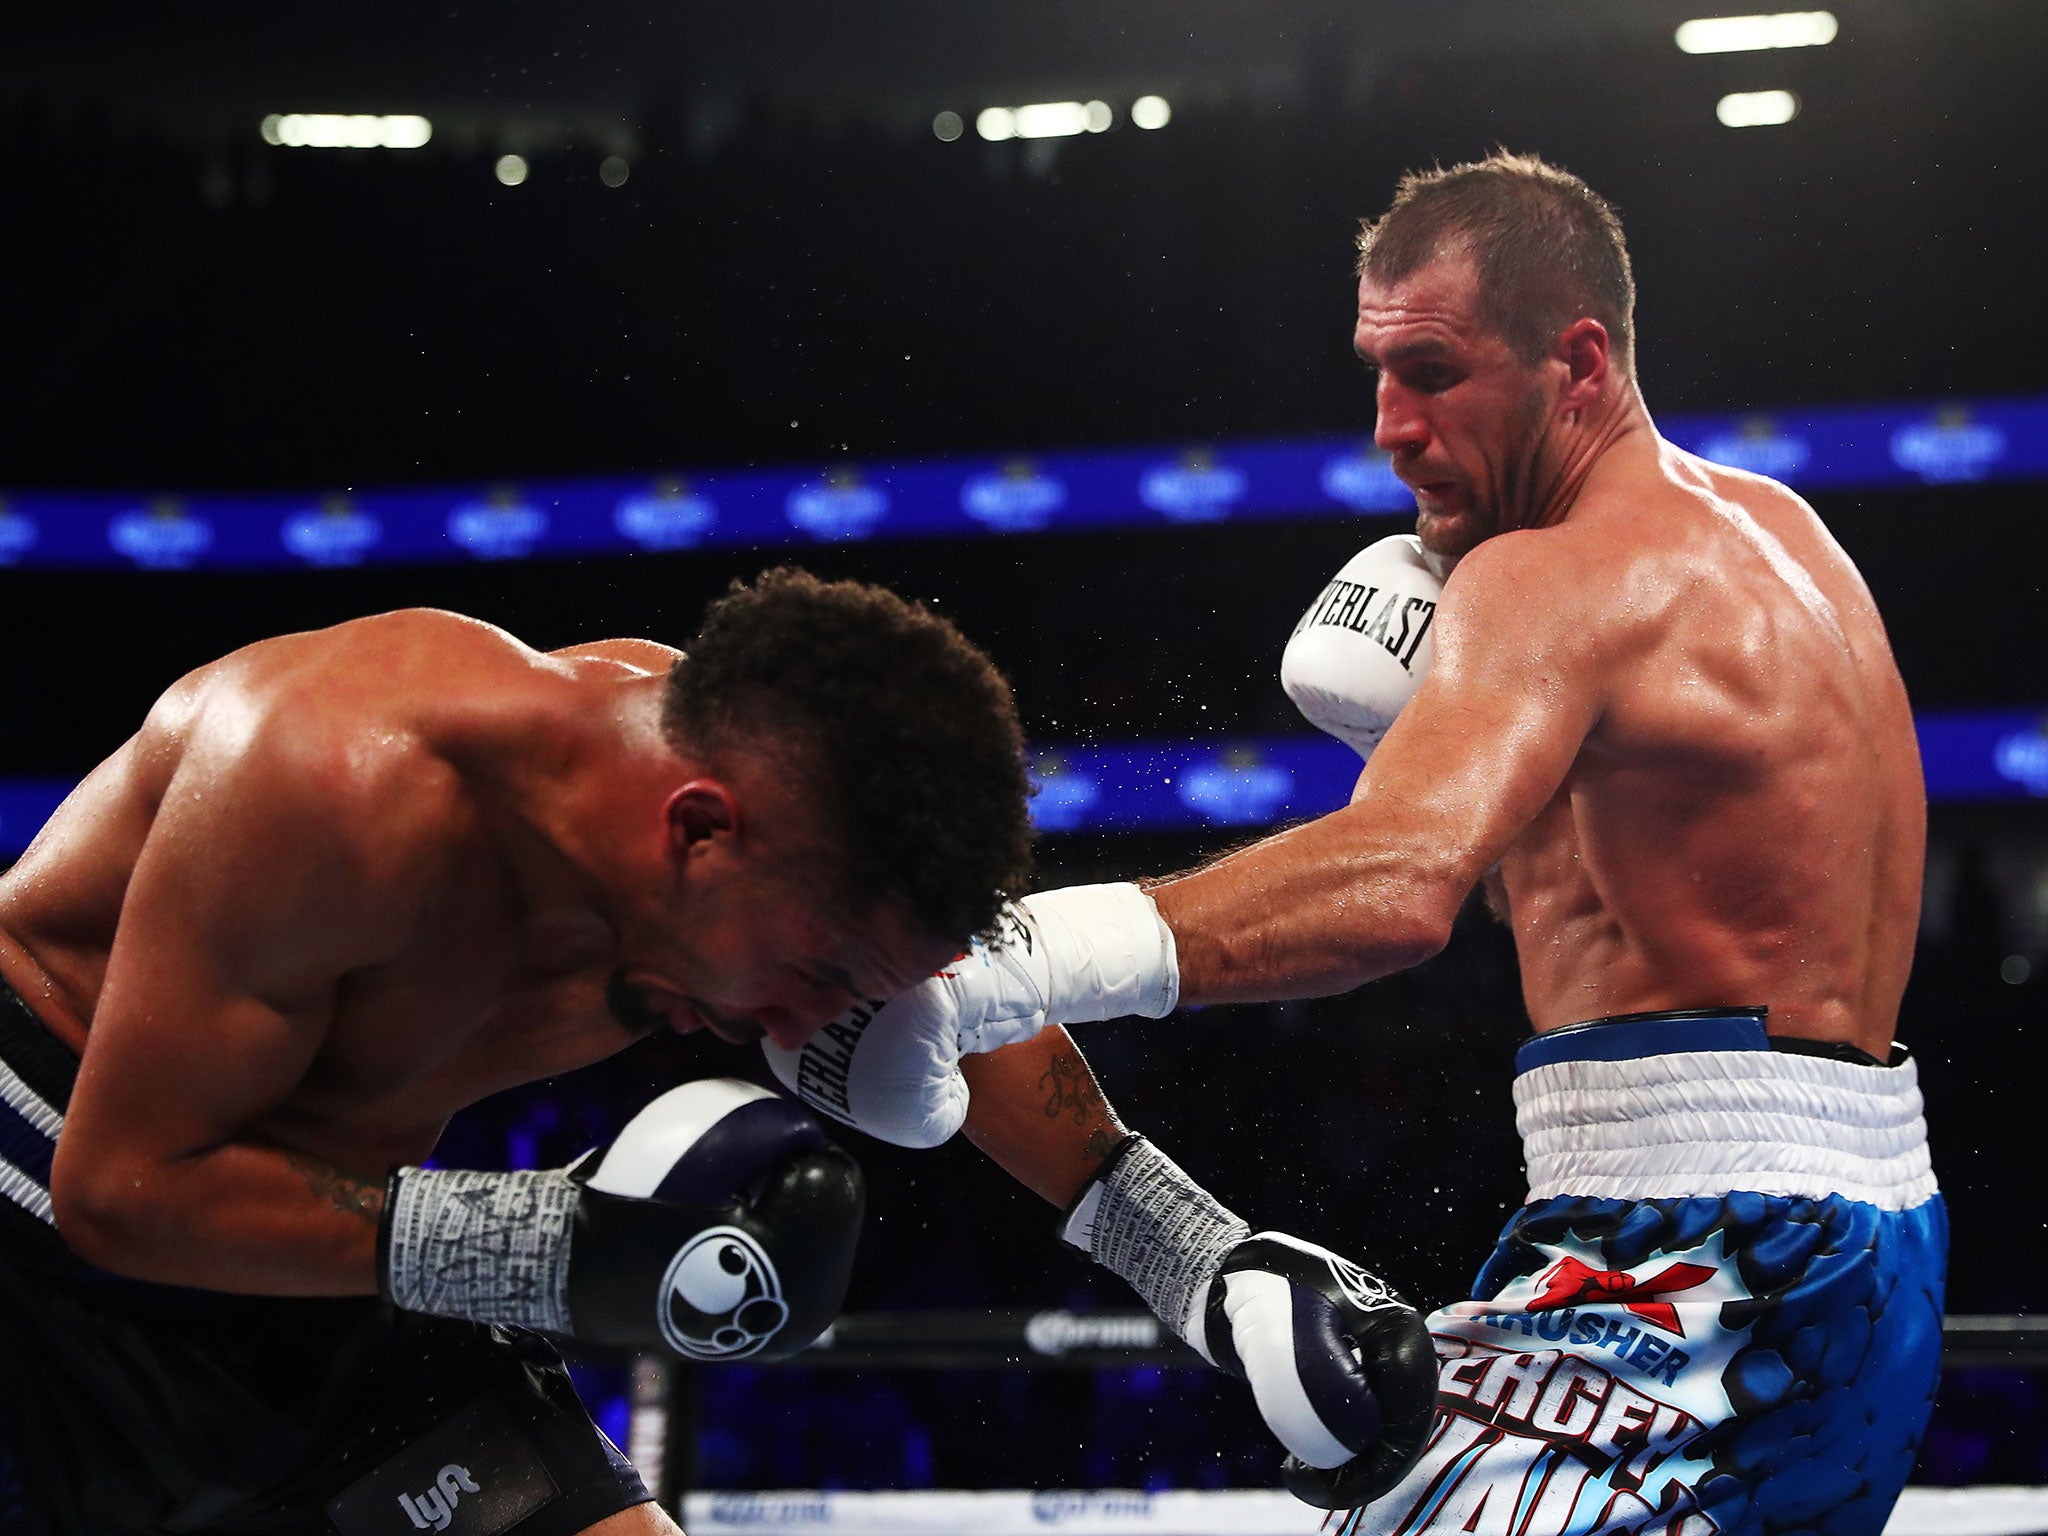 Ward had to fight back hard after suffering a second-round knockdown